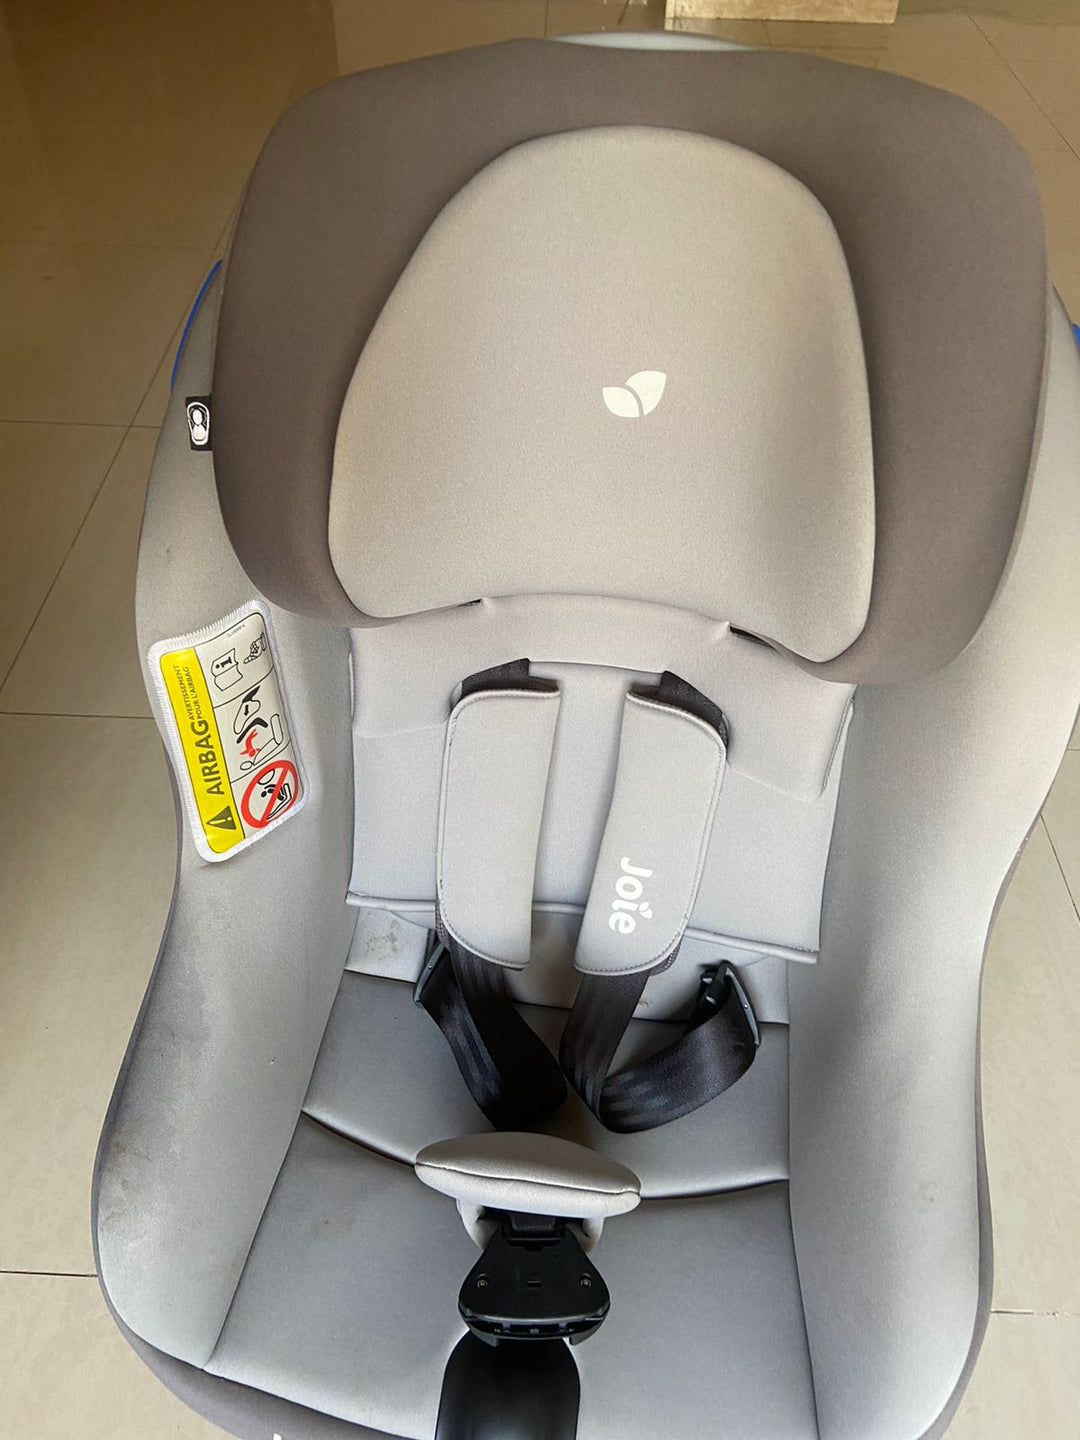 Joie Rear facing Baby Car Seat